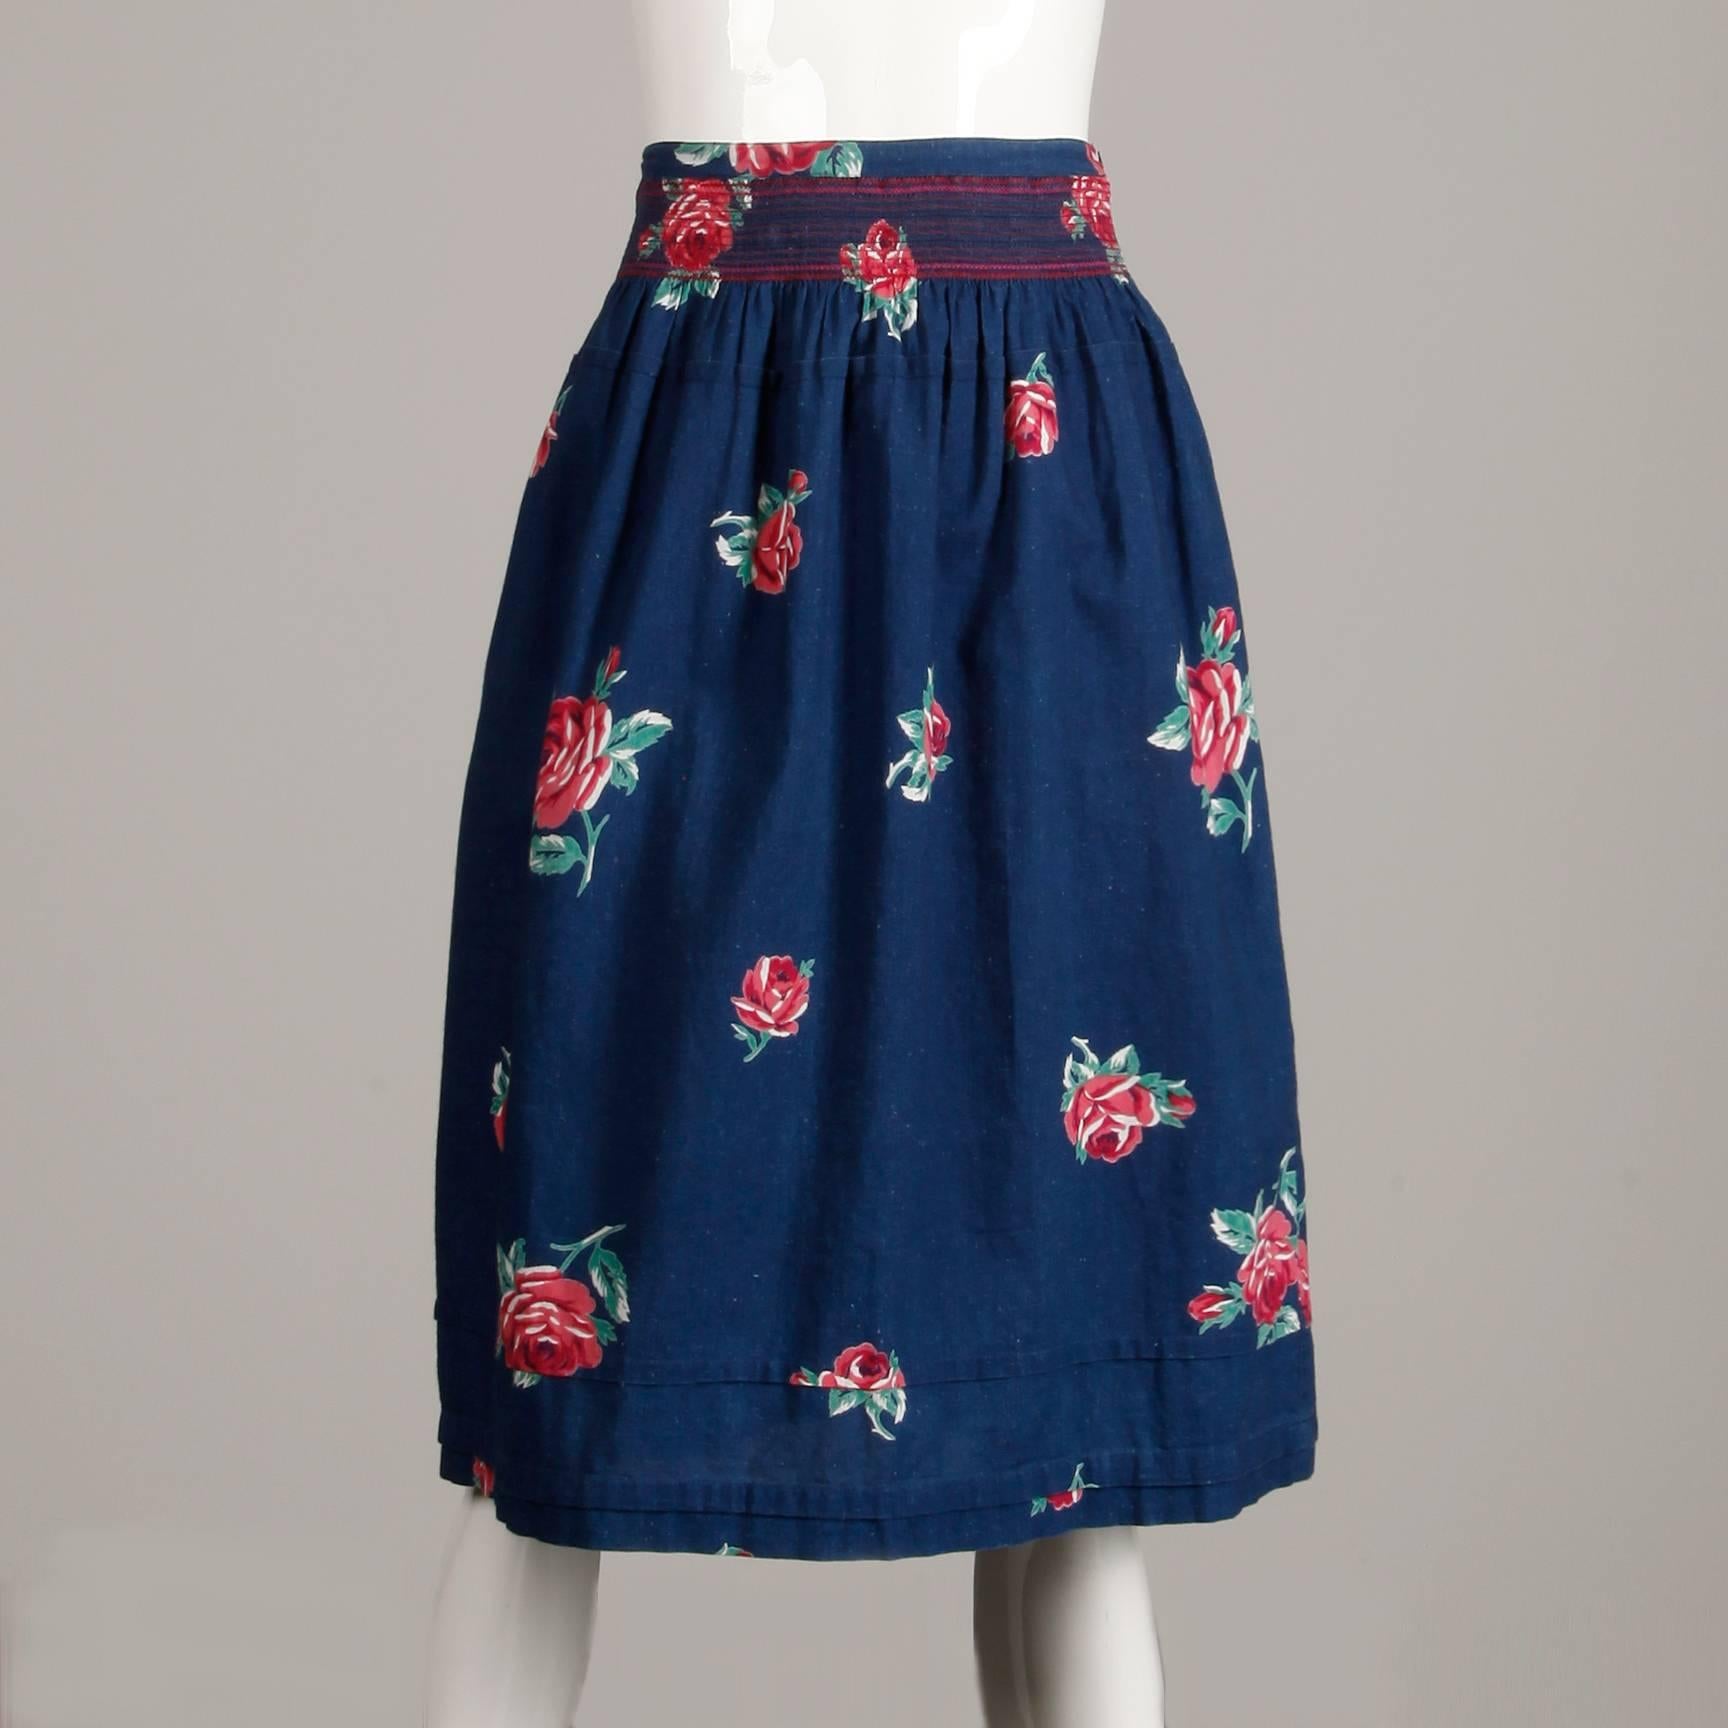 Darling vintage 1970s floral print denim skirt by Kenzo. Unlined with side button closure. The marked size is 38, and the skirt fits like a modern size small. 100% cotton. The waist measures 25